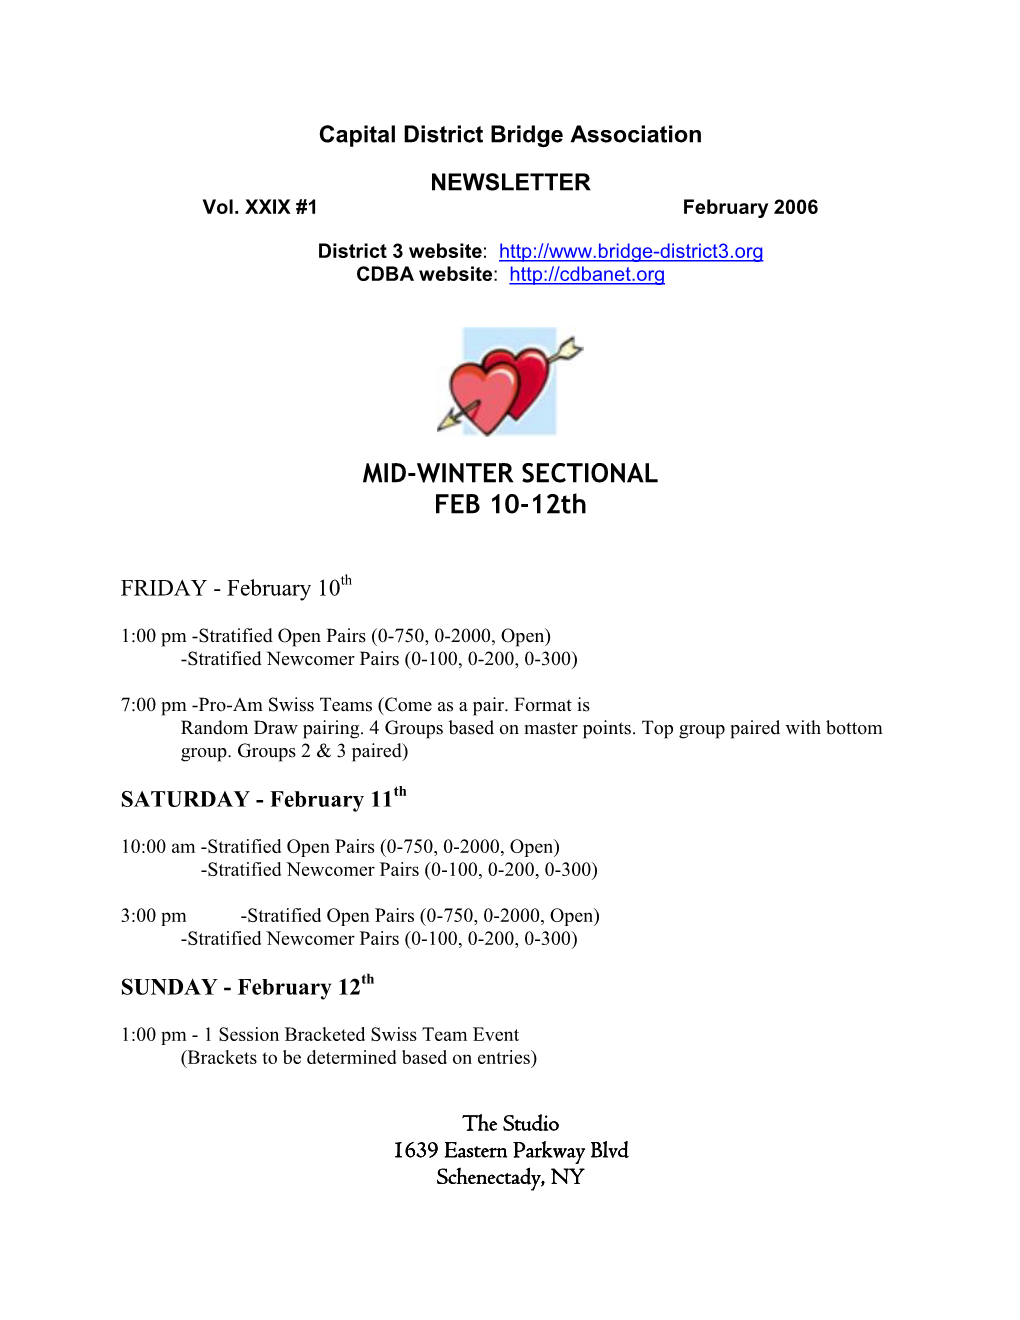 MID-WINTER SECTIONAL FEB 10-12Th